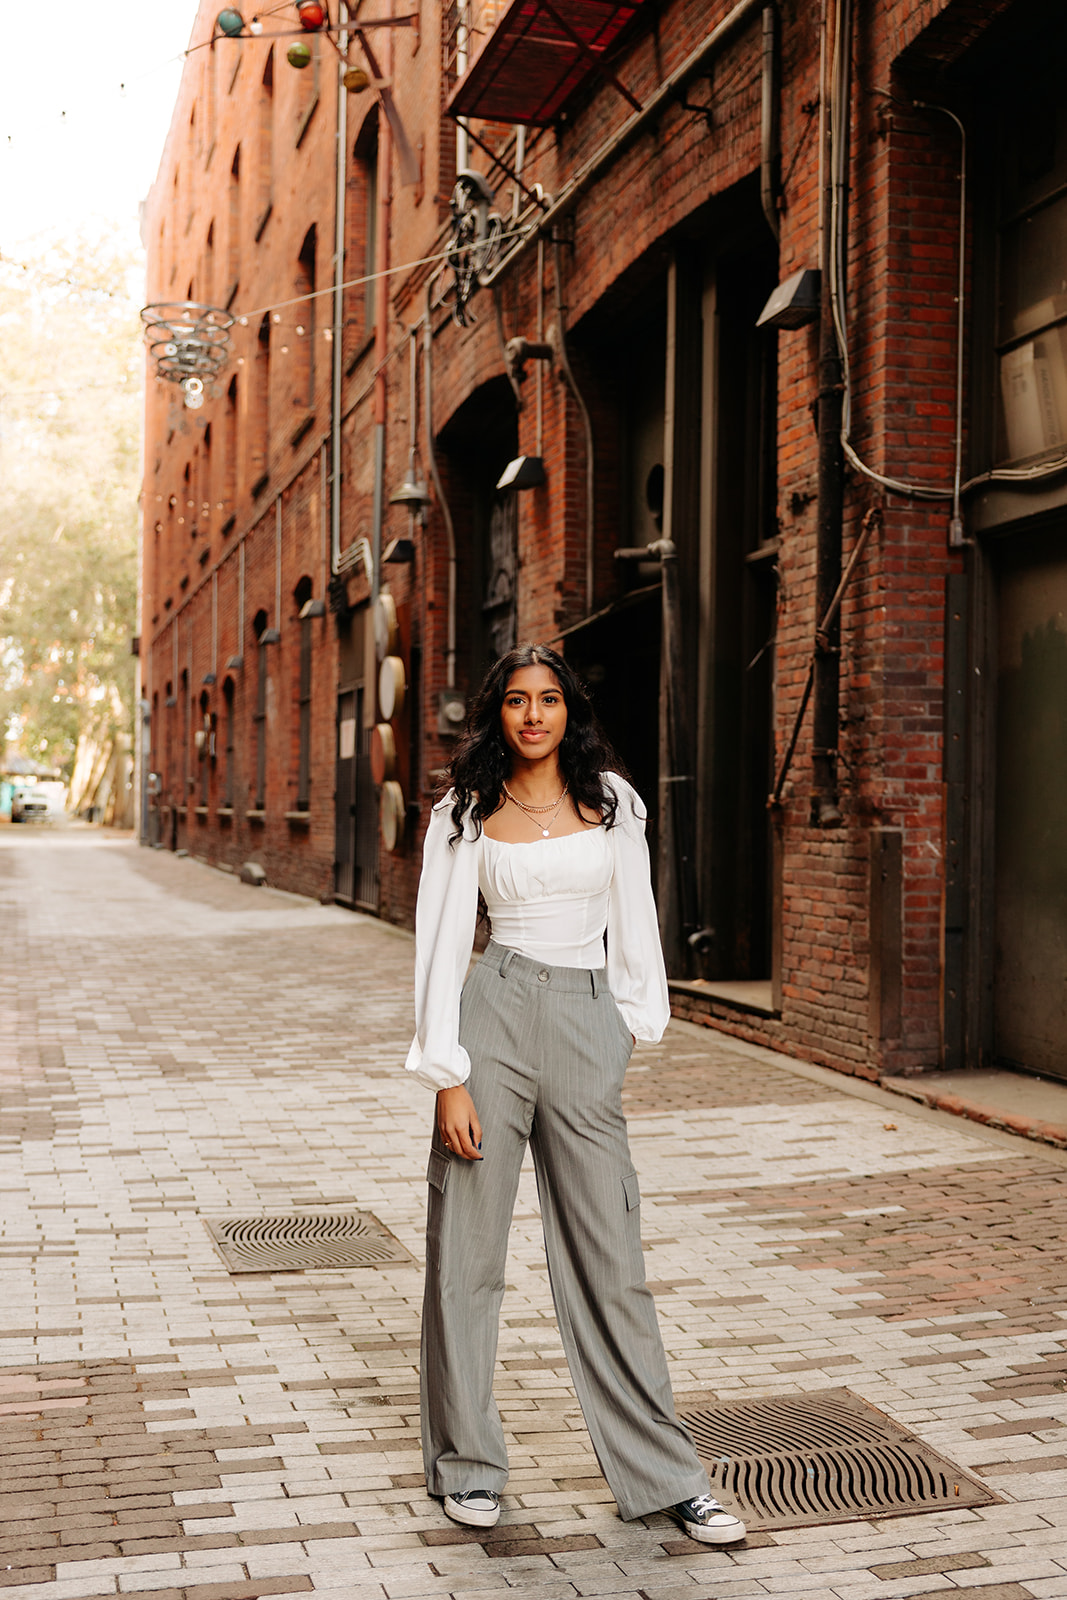 An edgy photo of an ethnic high school senior girl posing in front of a brick alleyway in Pioneer Square, Seattle.